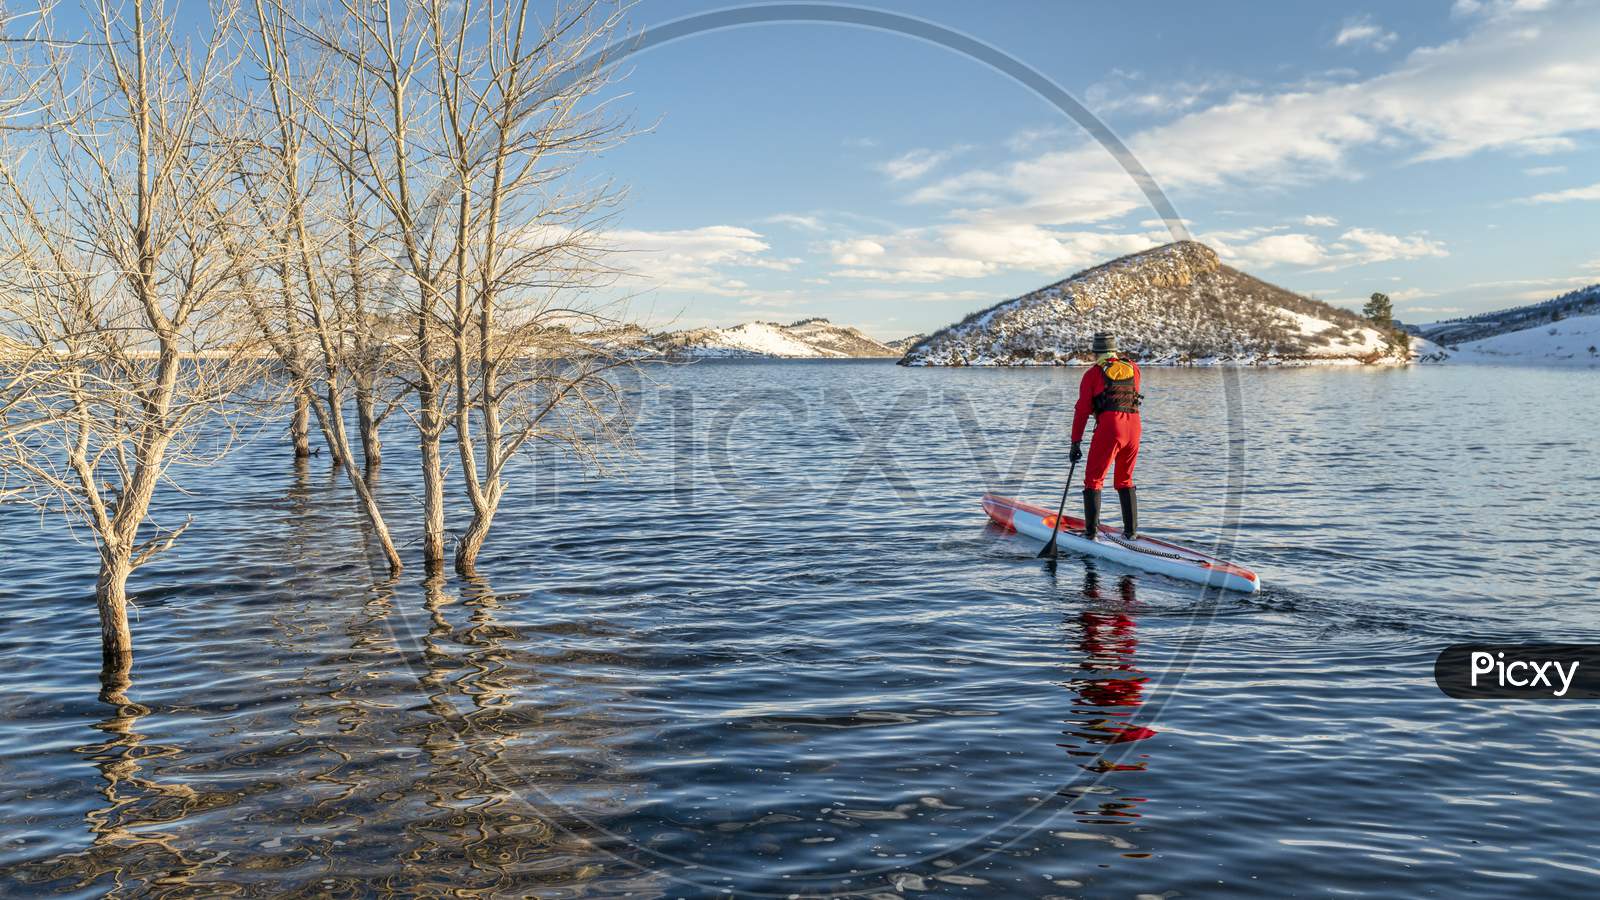 Male Paddler In A Drysuit And Life Jacket Is Paddling A Long Racing Stand Up Paddleboard In Winter Conditions On A Lake In Colorado - Horsetooth Reservoir, Fitness And Training Concept